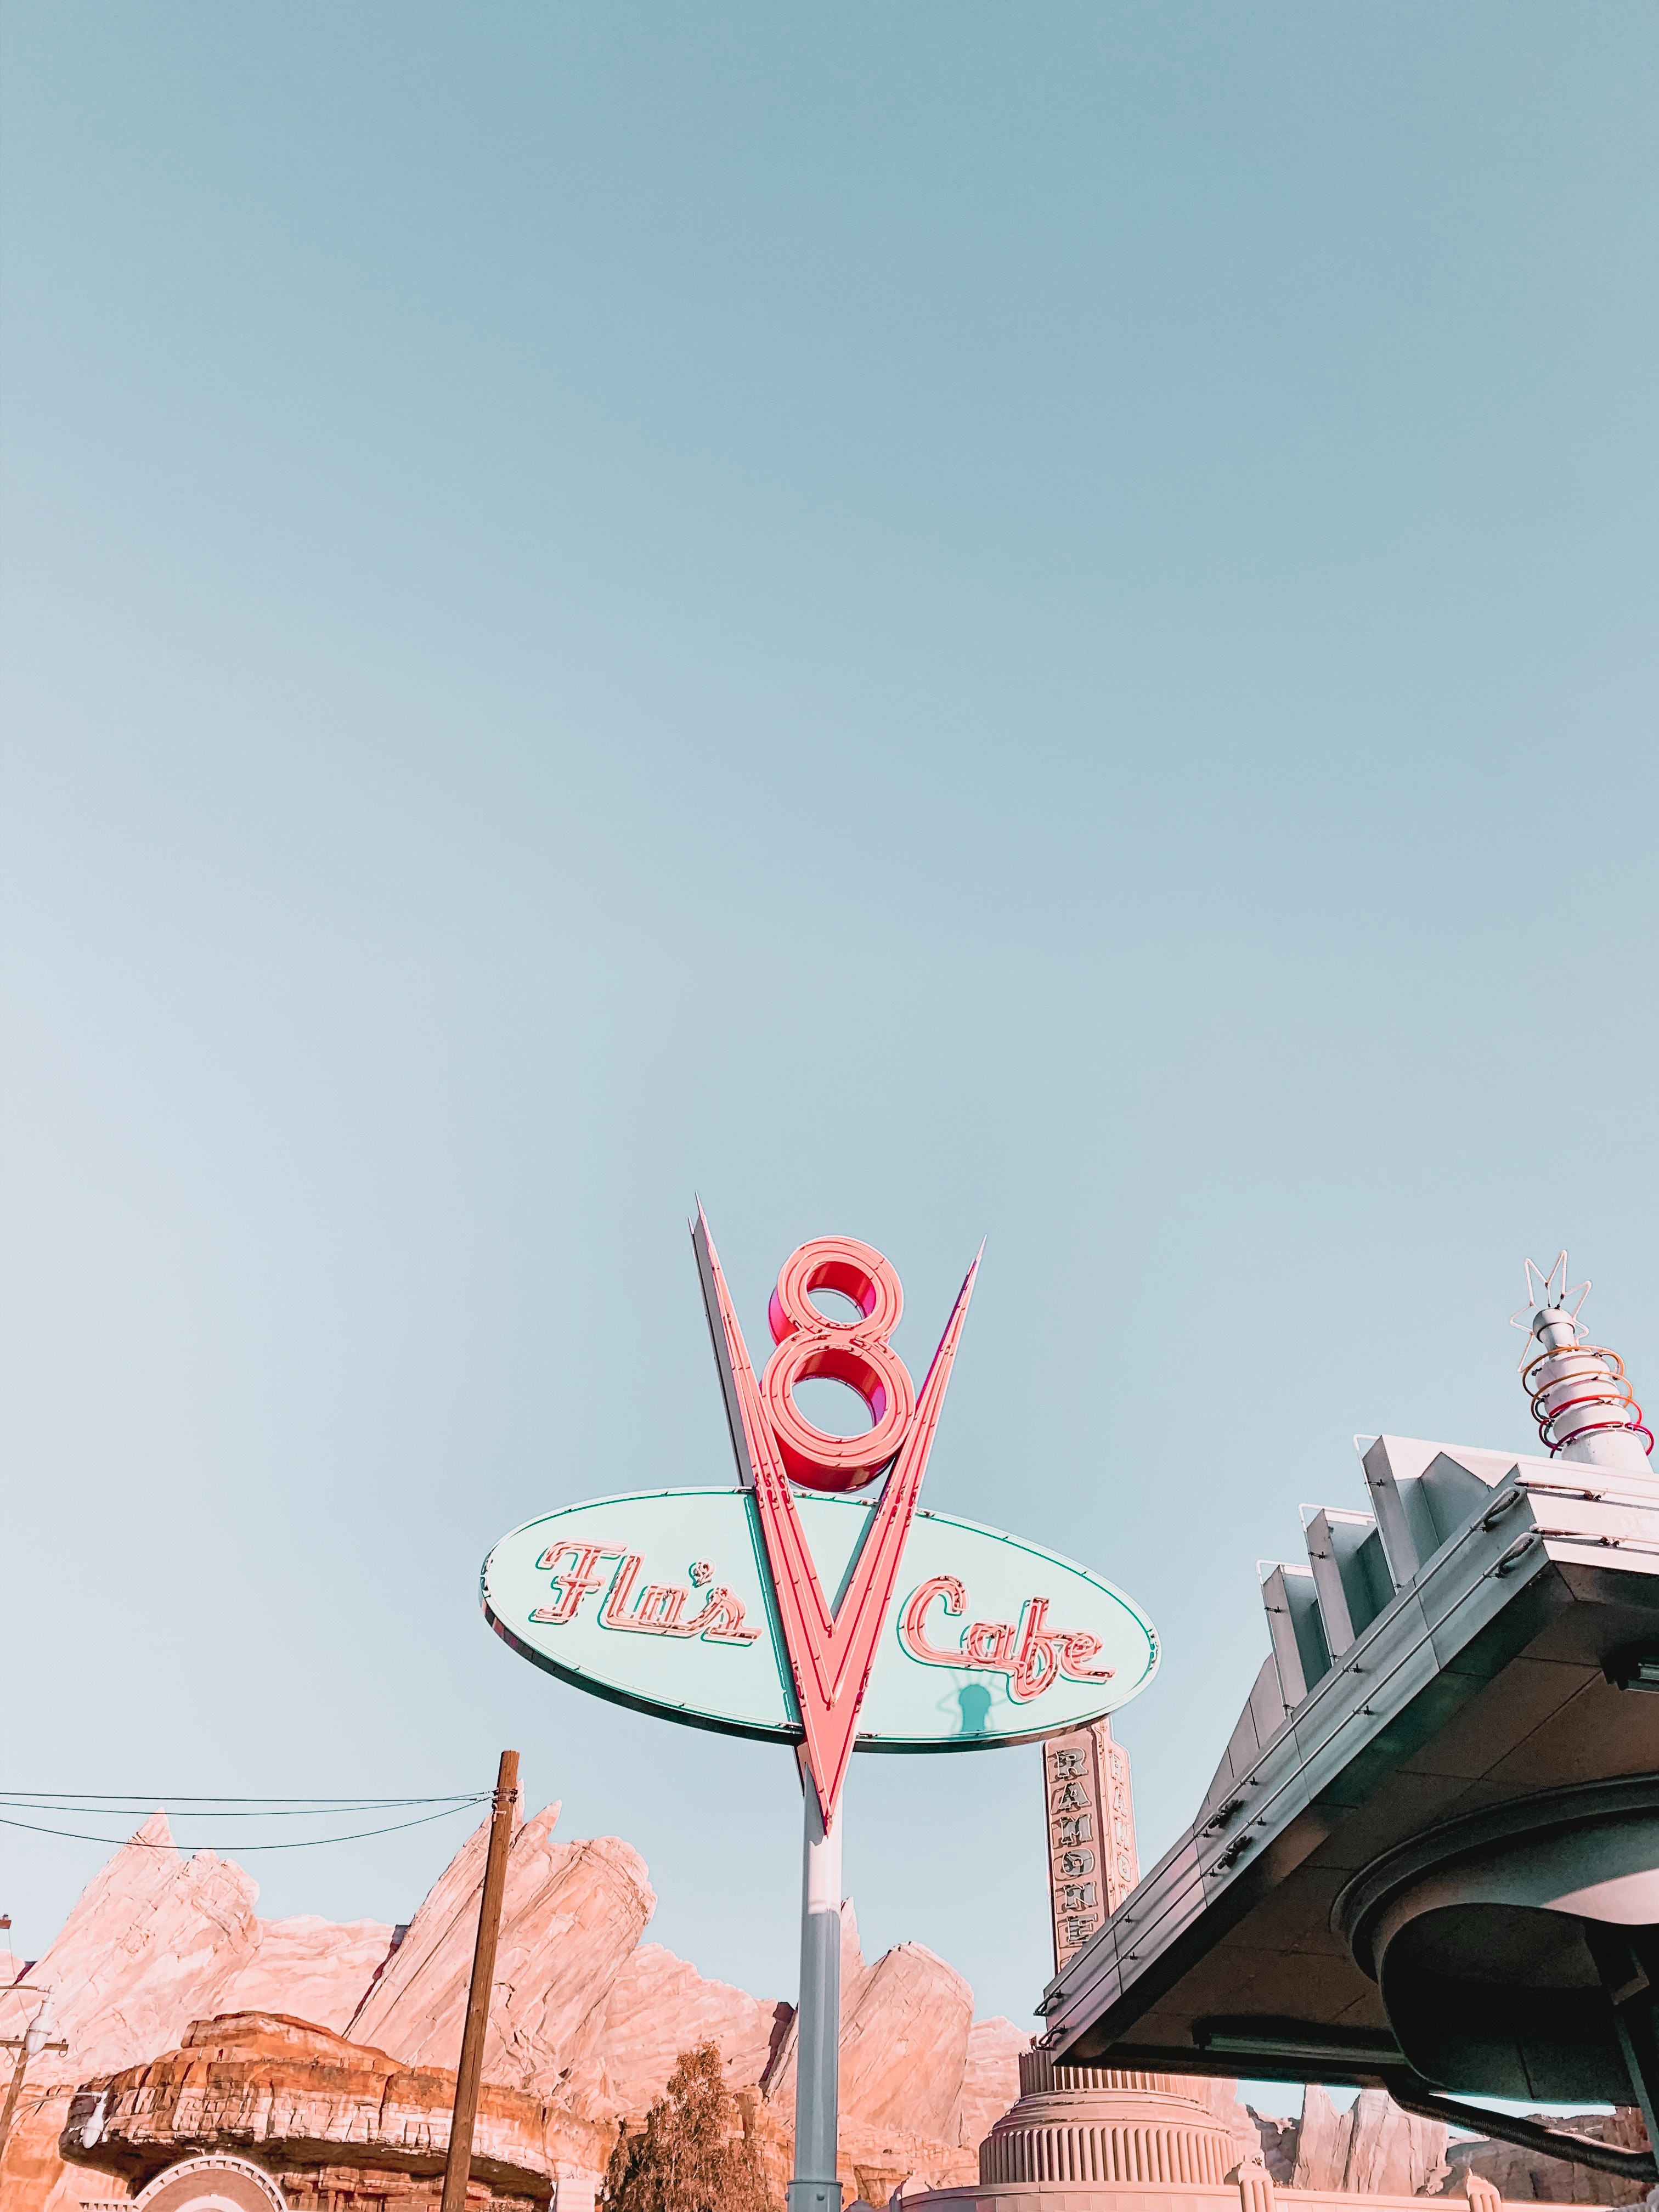 Route 66 Wallpapers